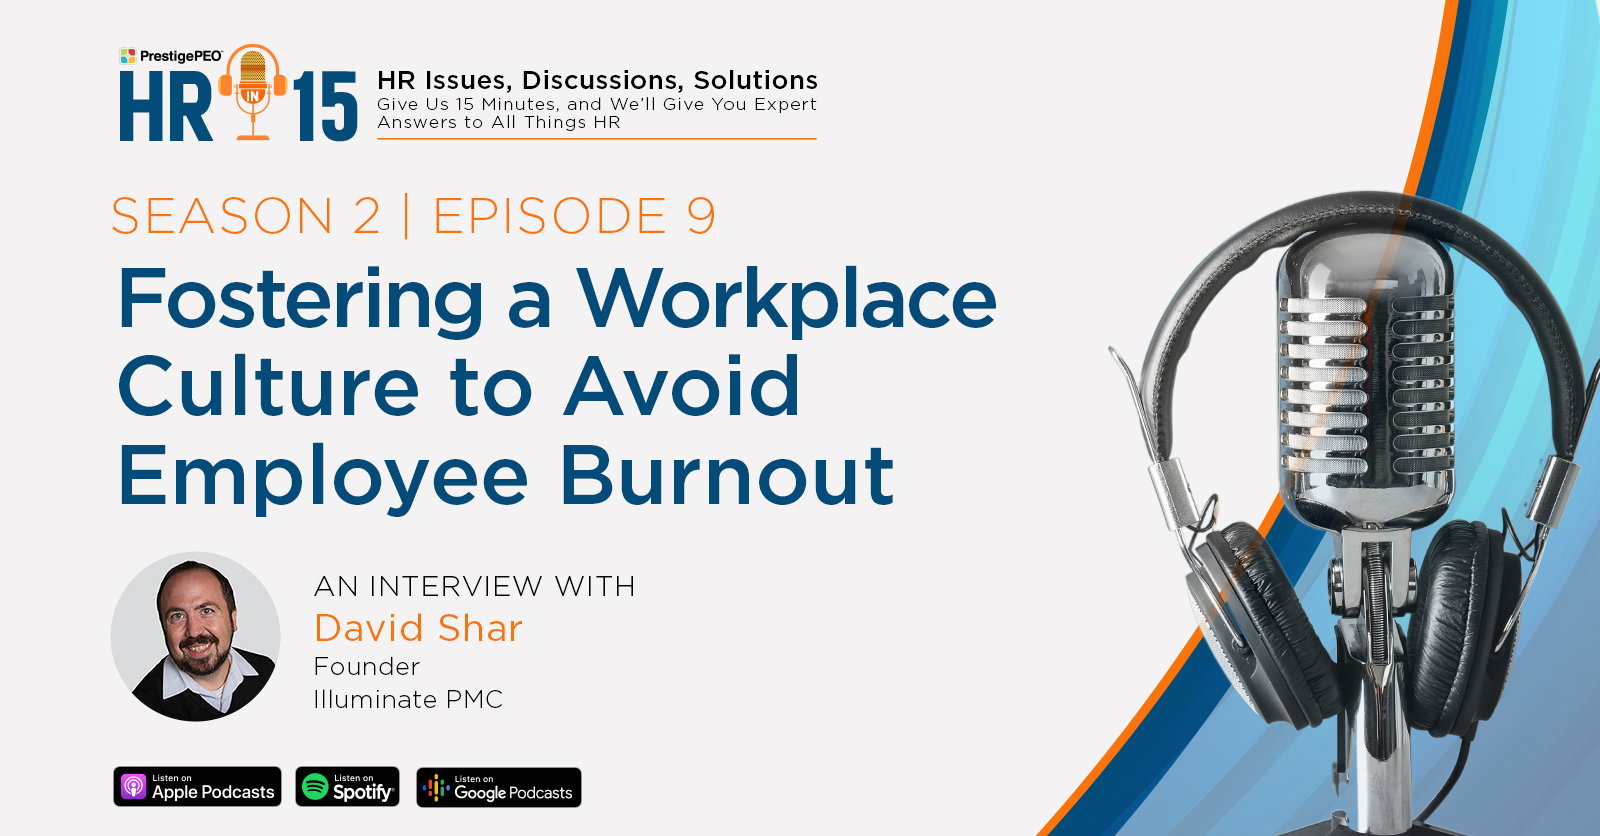 HR-in-15 Interview with David Shar: Fostering a workplace culture to avoid employee burnout